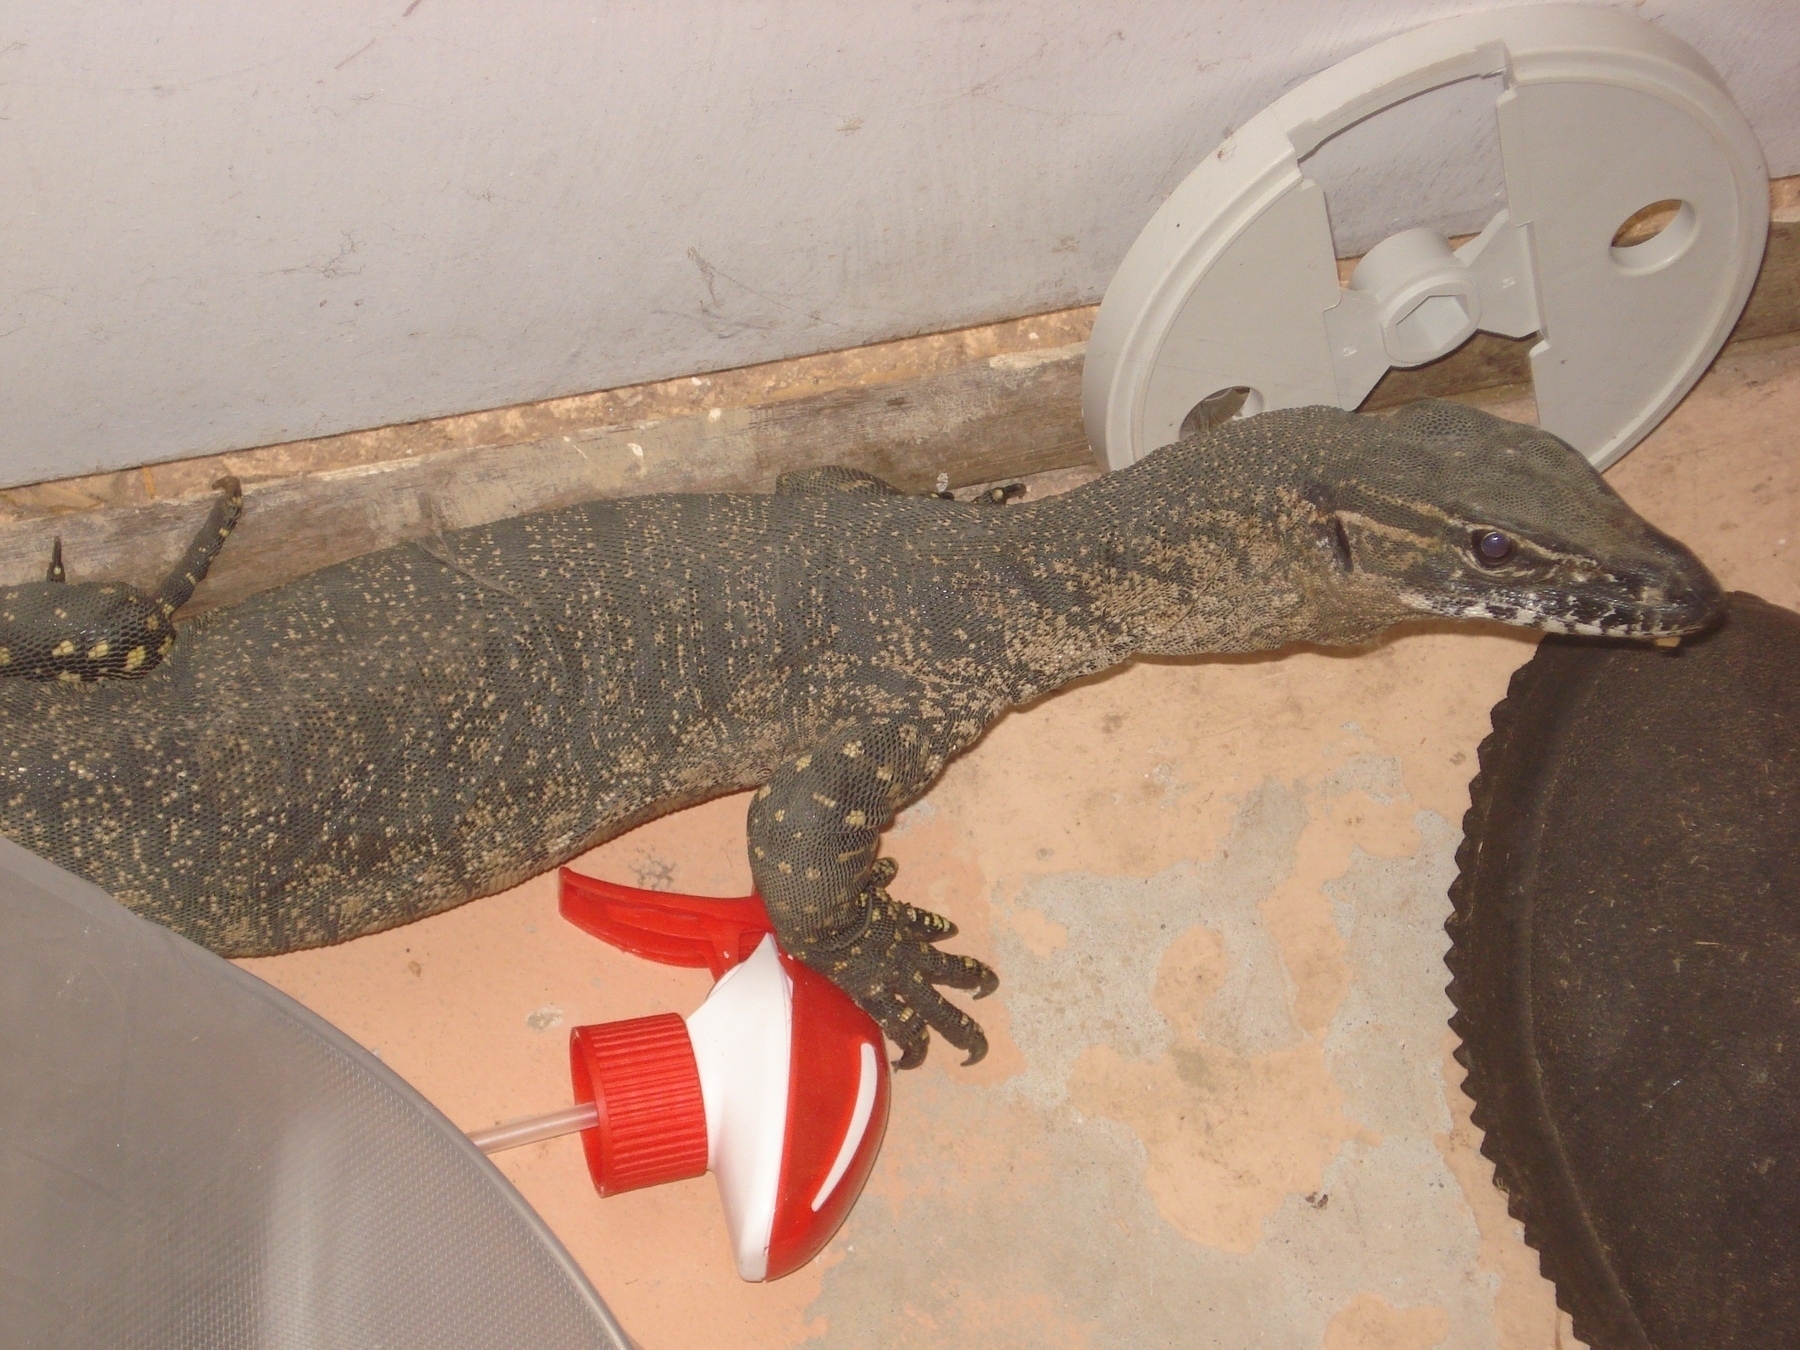 A big lizard (a goanna) is alert on a concrete floor, against the base of a wall. The scales on the lizard’s skin are clearly defined, its body coloured in vertical bands of solid darker brown and mottled lighter brown. The lizard has a short, thick, bulky leg, which almost looks baggy, with long toes ending in sharp, curved claws. Its neck is long, and thickens where it joins the head, and the face is all darker brown, with a lighter horizontal band above and below the eye. Above the mouth is a mottled band of white and darker brown. A tip of the tongue pokes out the side, and the eye is big and round.